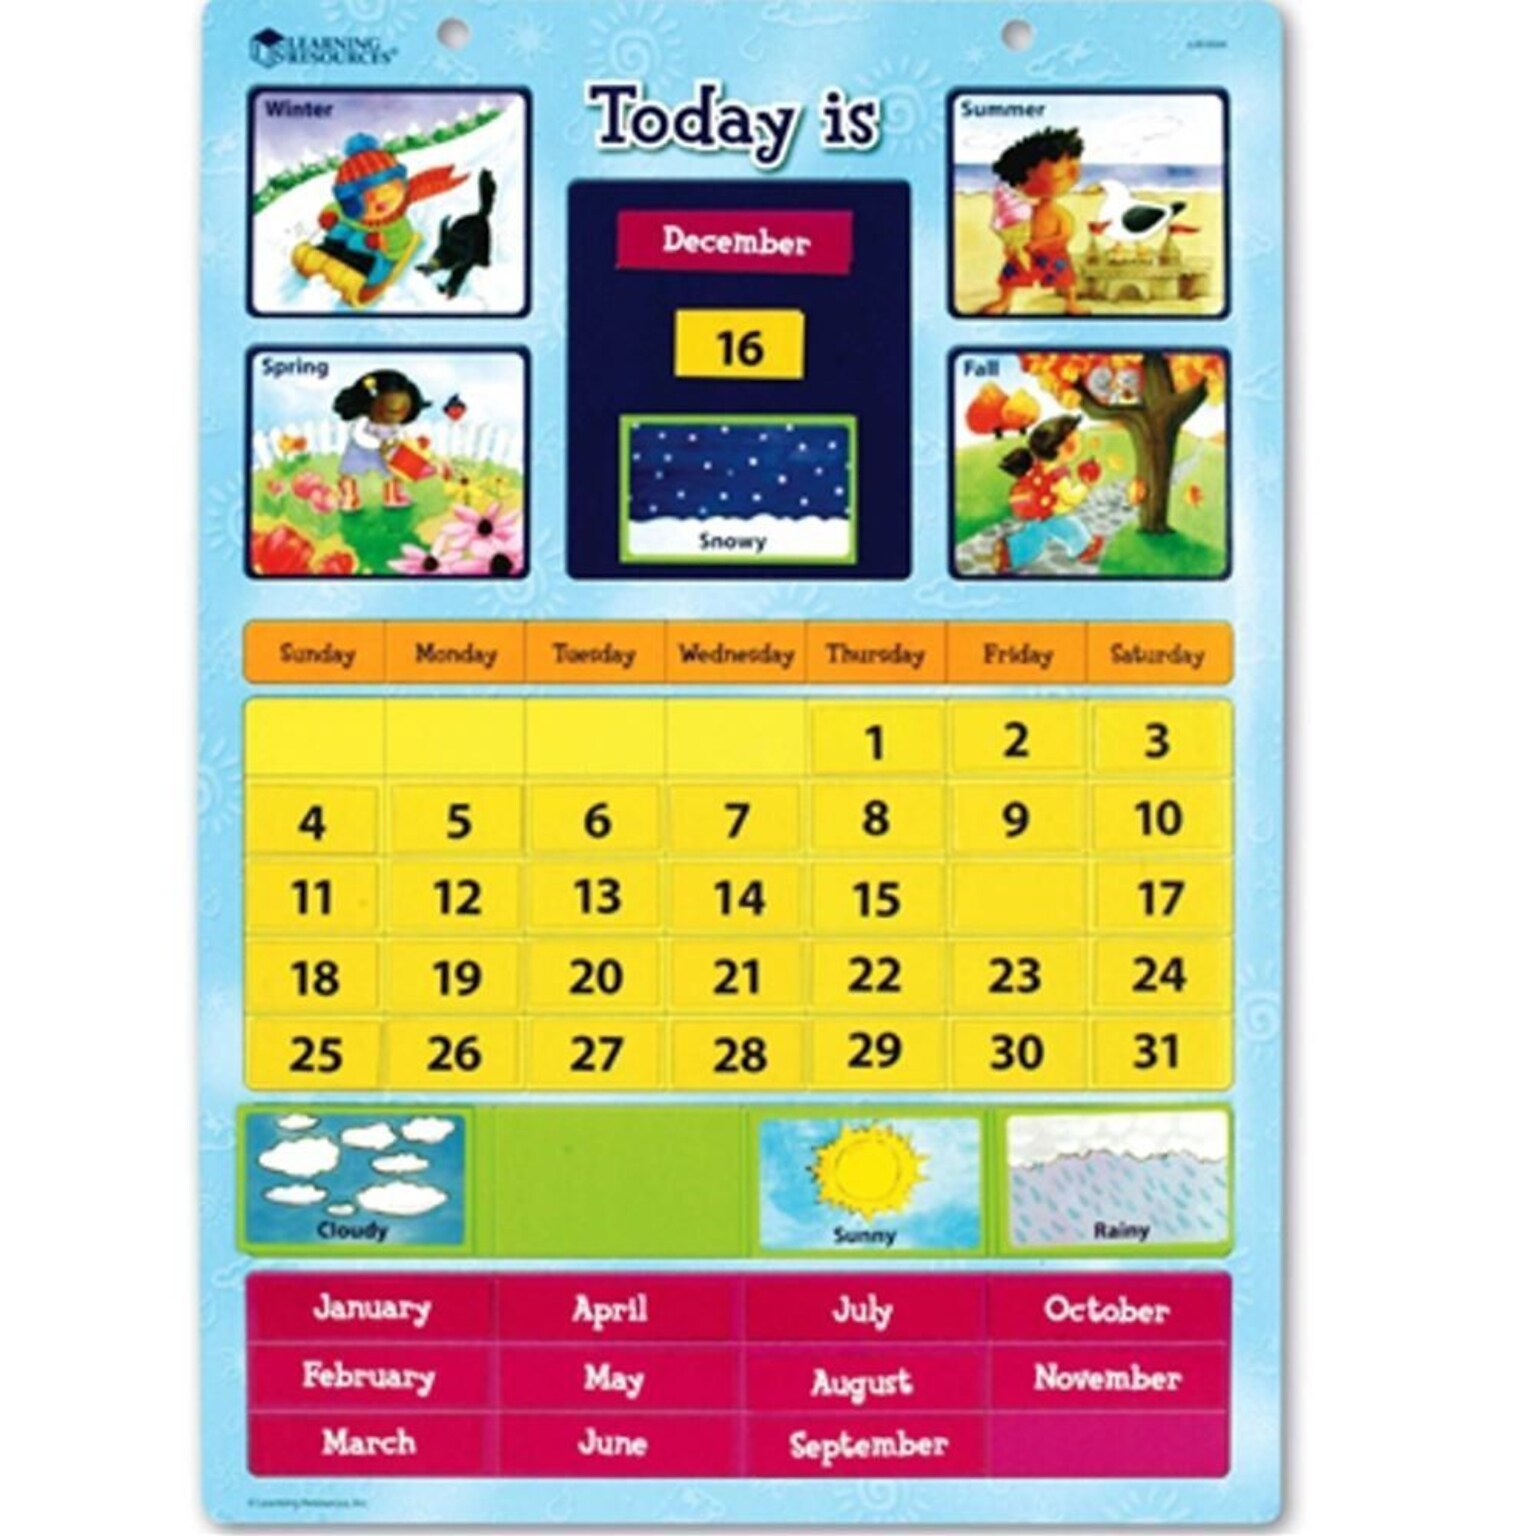 Learning Resources Magnetic Learning Calendar (LER0504)